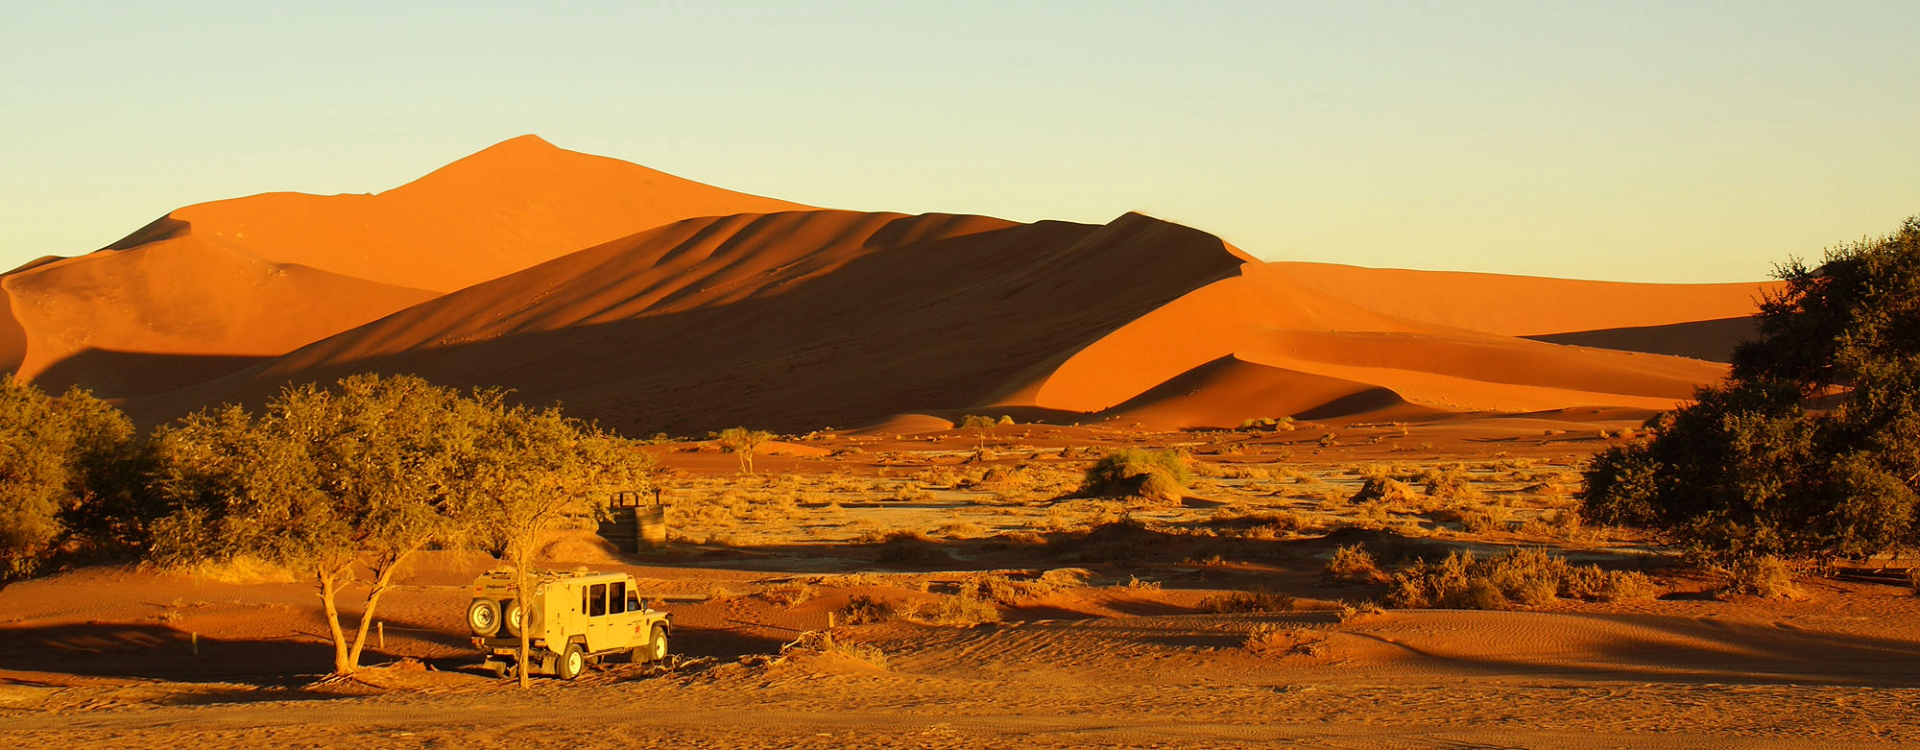 Namibia Travel Requirements